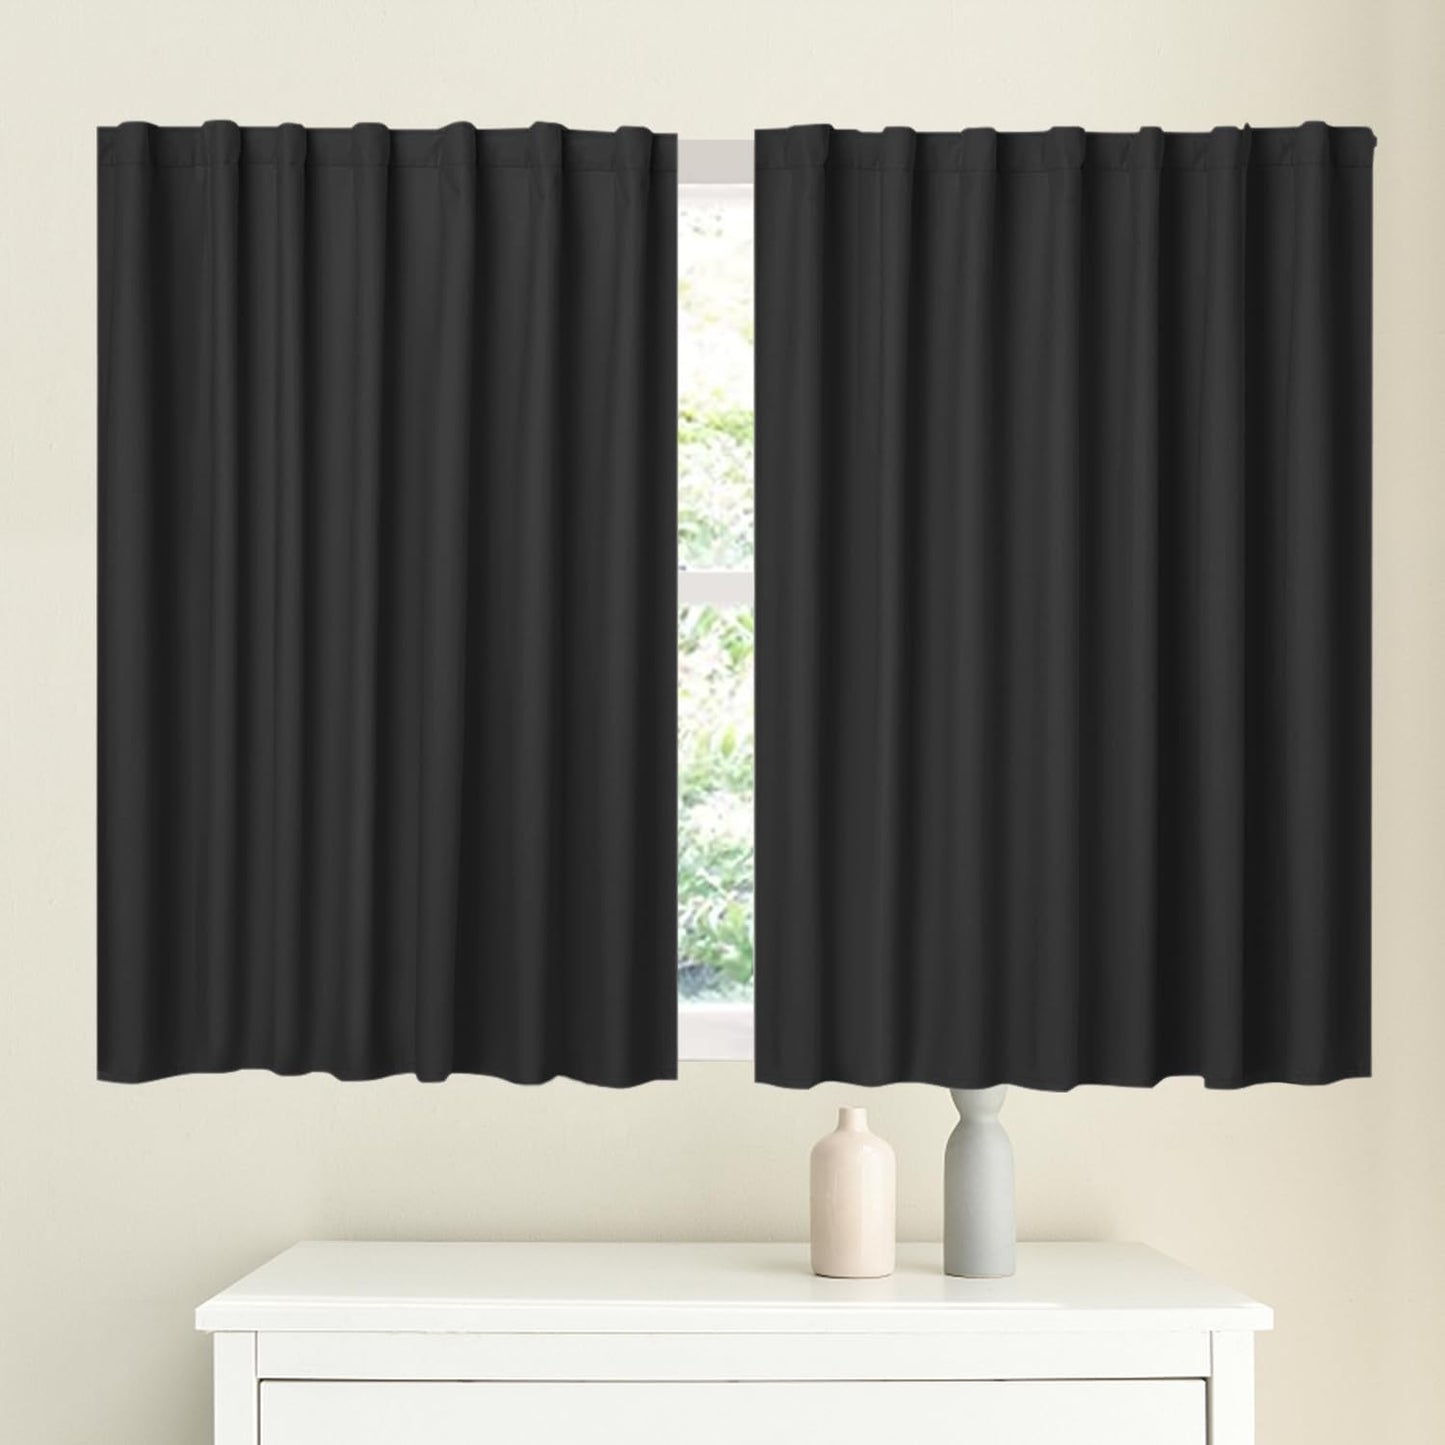 Muamar 2Pcs Blackout Curtains Privacy Curtains 63 Inch Length Window Curtains,Easy Install Thermal Insulated Window Shades,Stick Curtains No Rods, Black 42" W X 63" L  Muamar Black 34"W X 45"L 